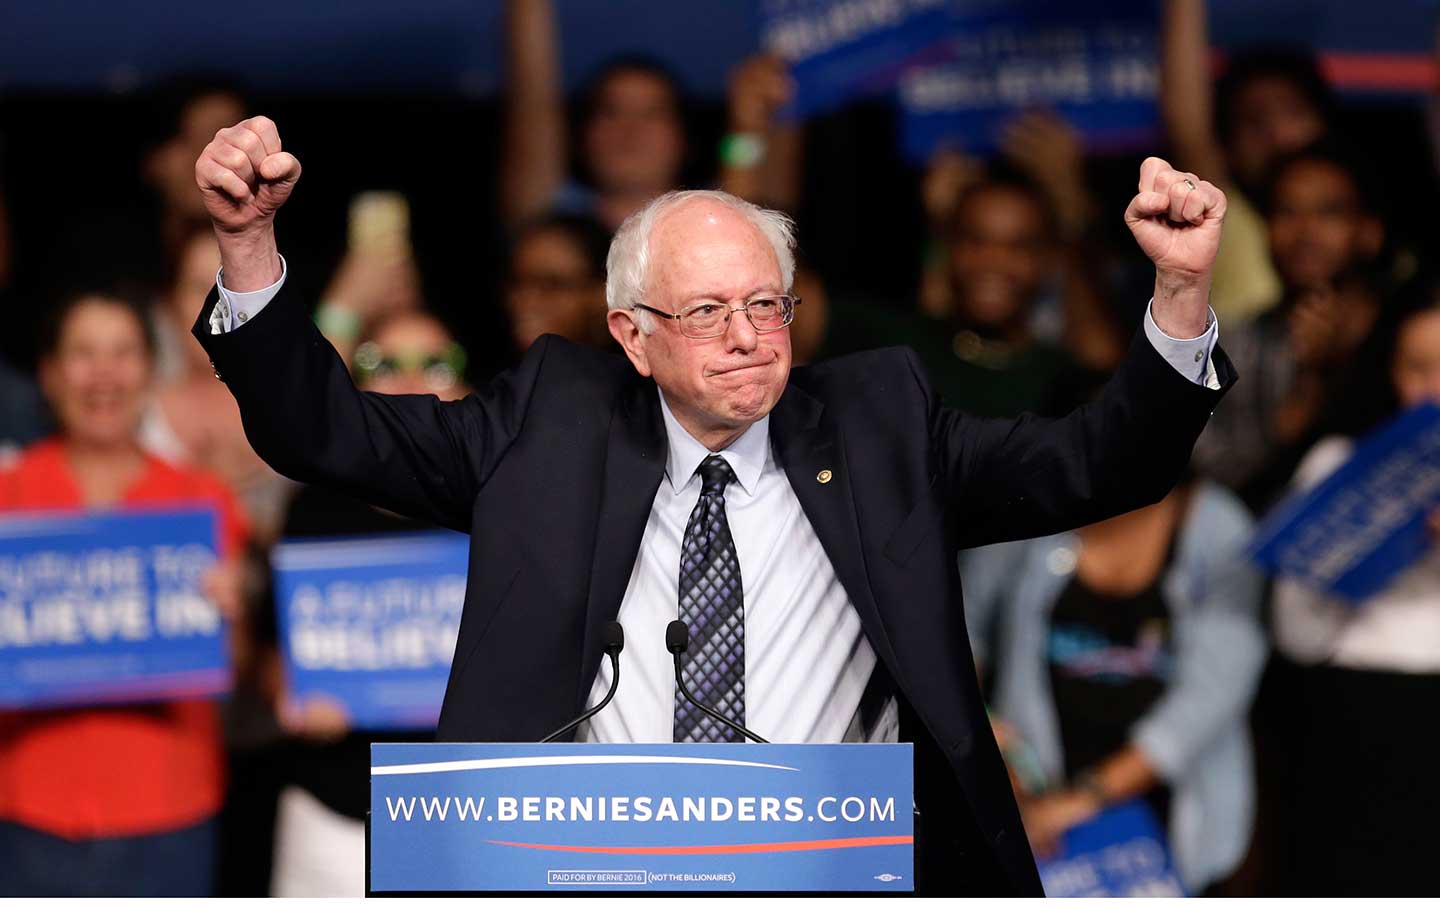 Bernie Sanders Wins in Michigan Thanks to Trade Policy